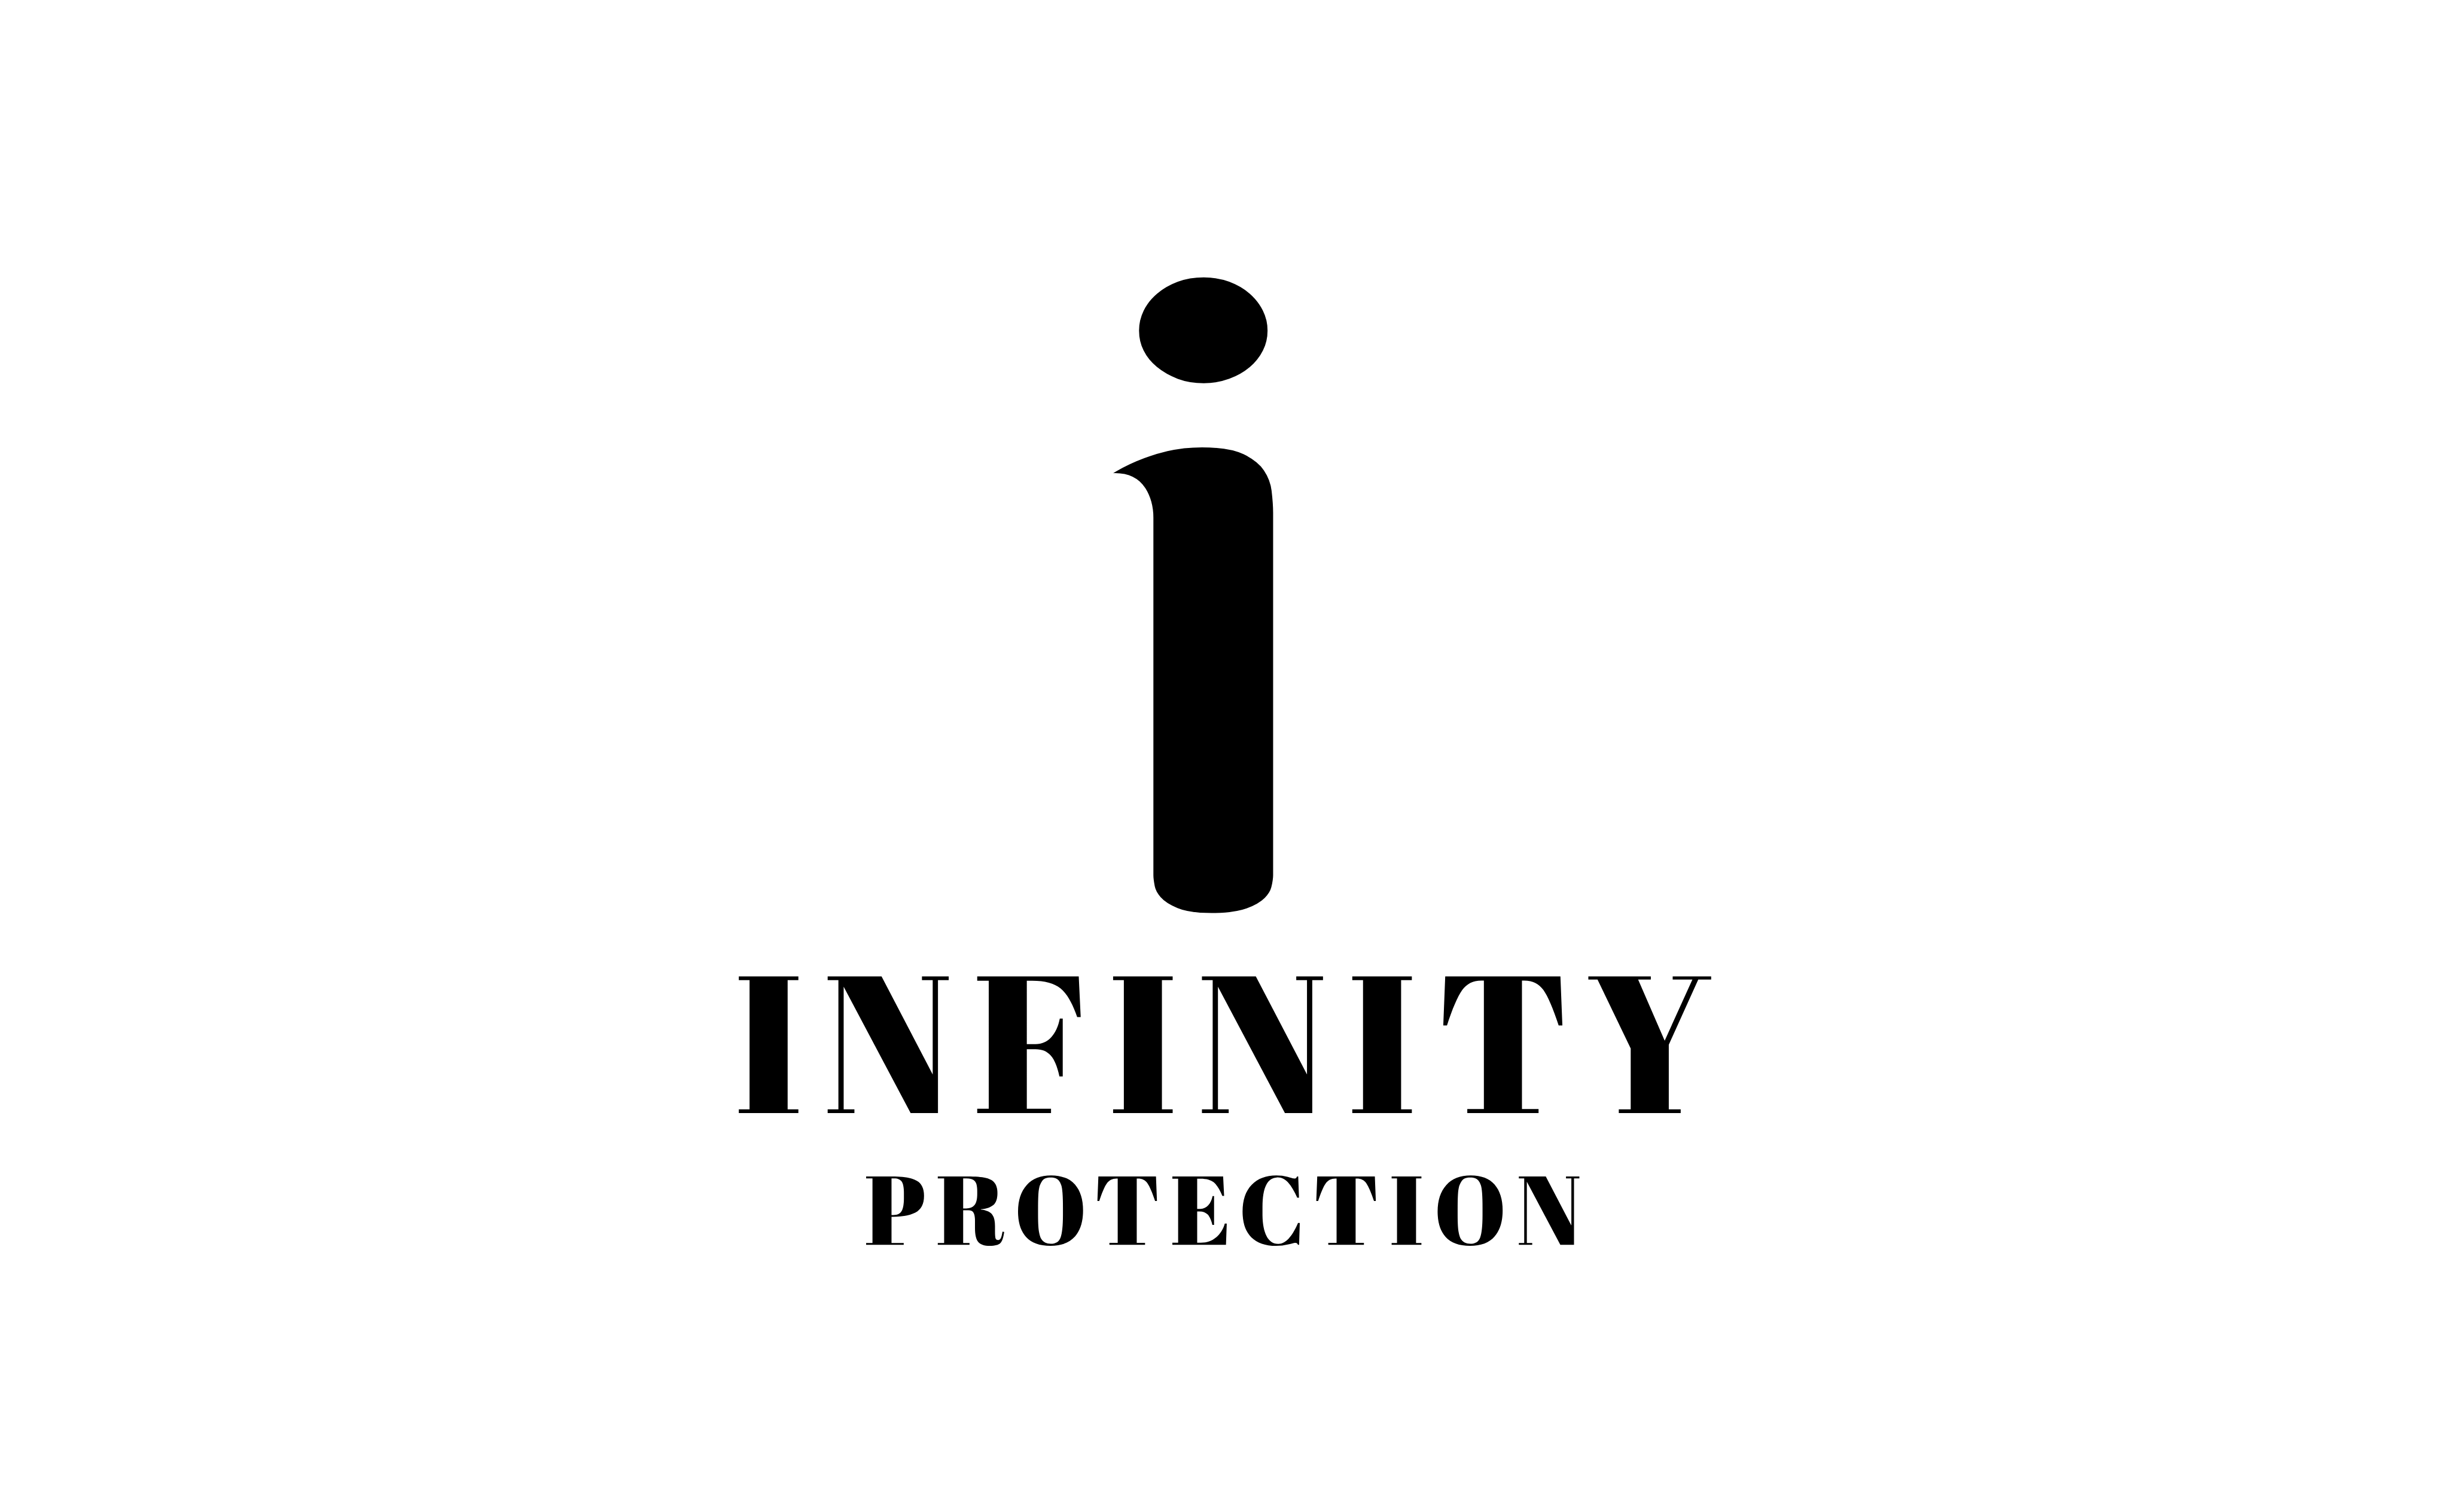 INFINITY PROTECTION